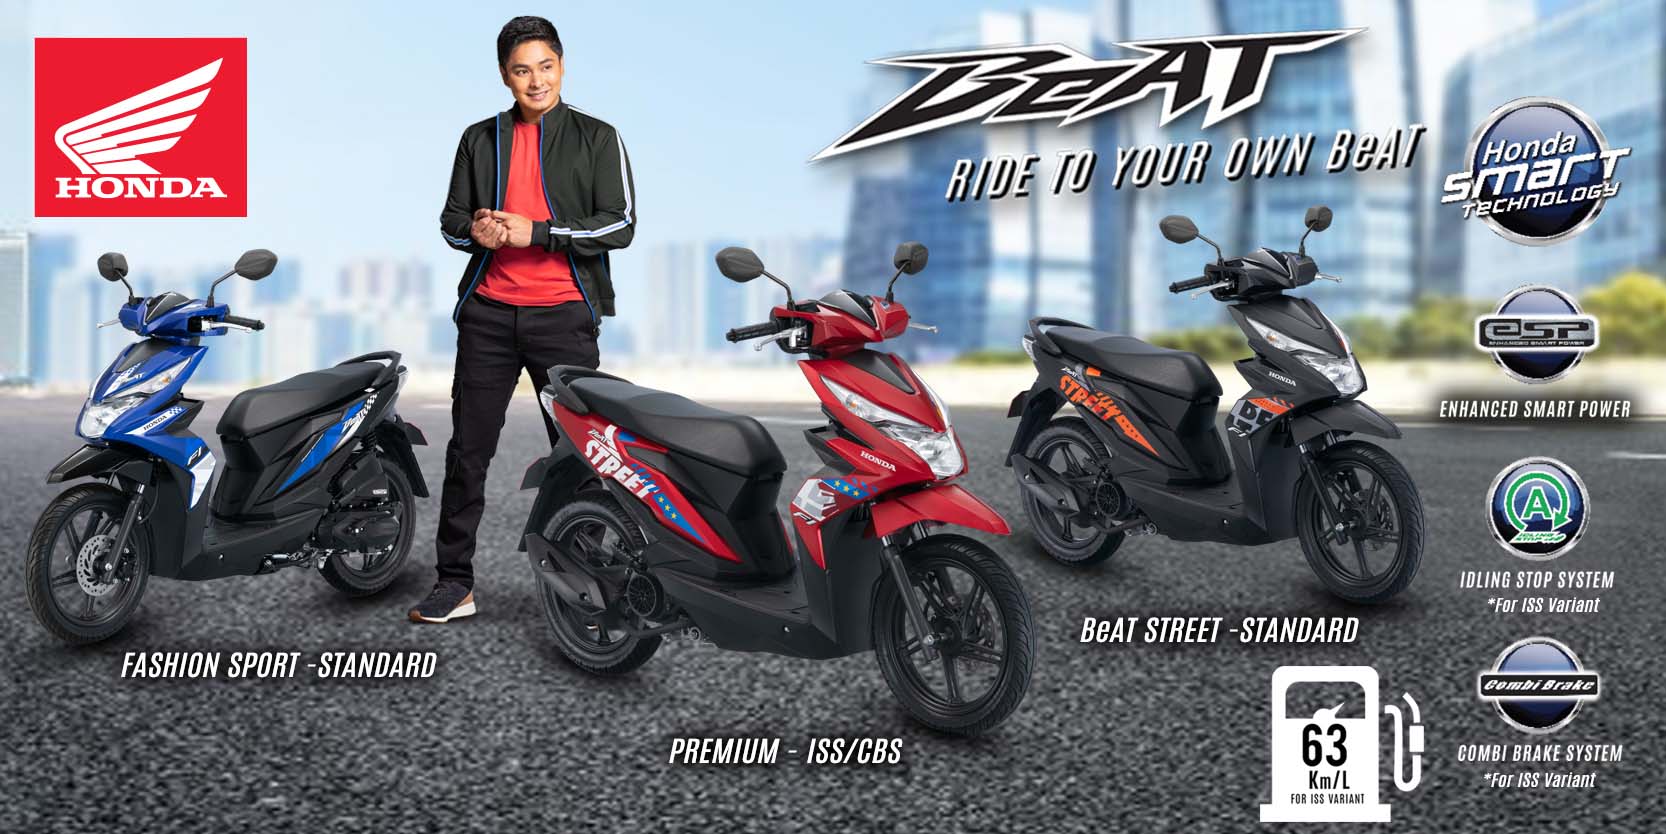 Honda PH shares the best ways every rider to Stay Safe, Be Smart on the Road